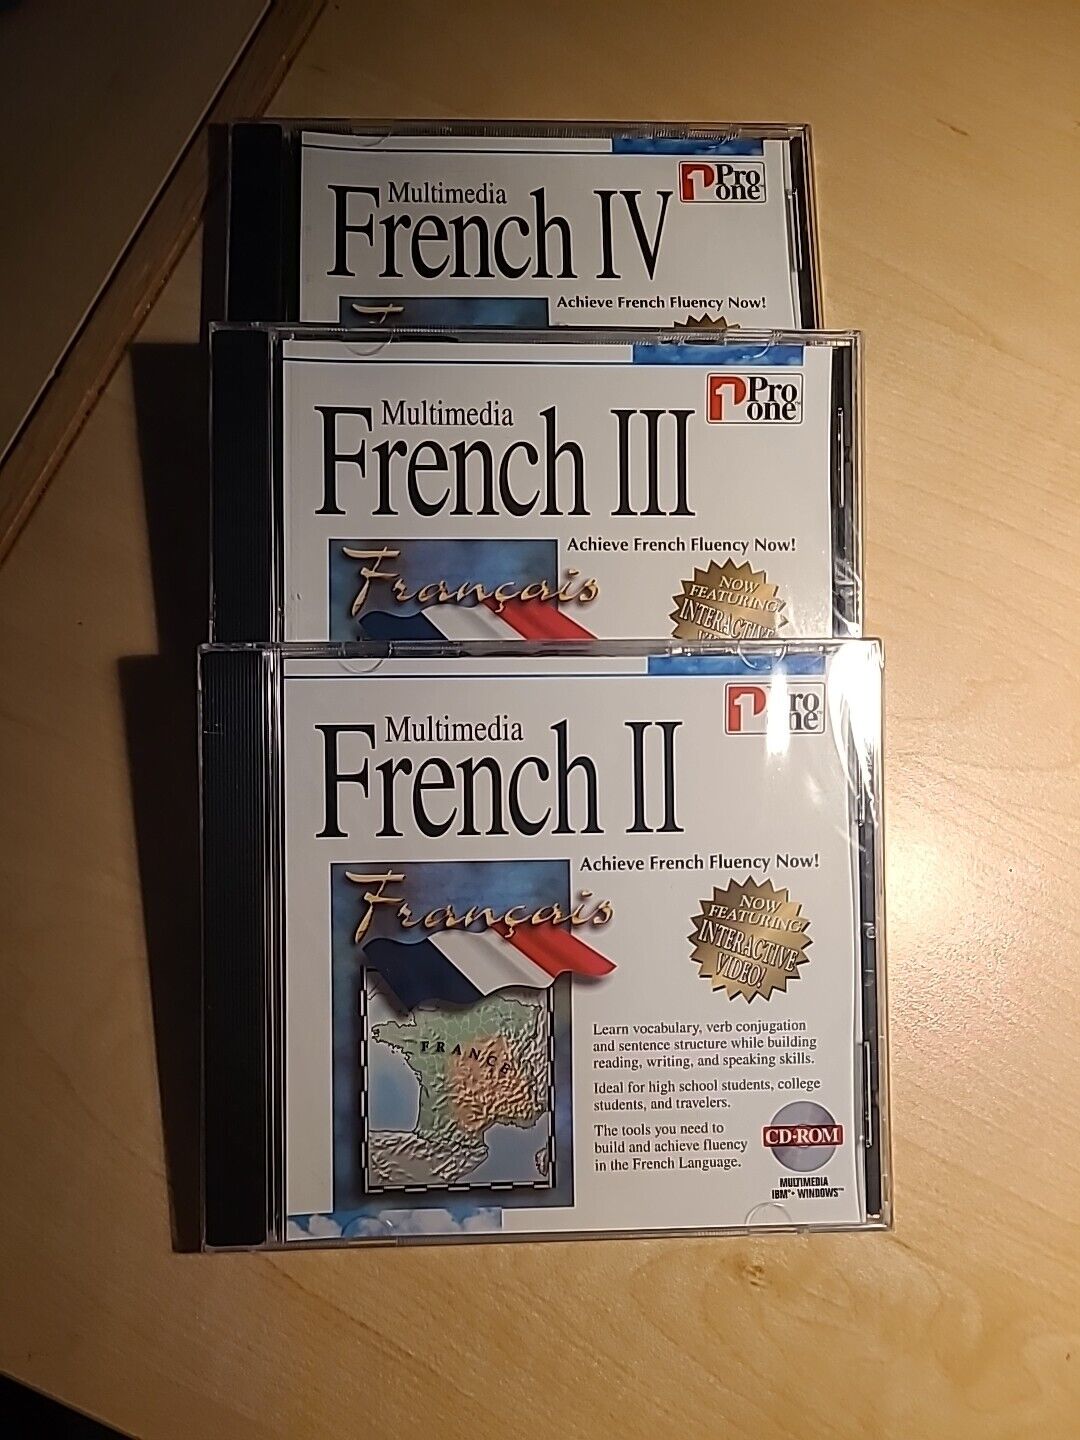 Multimedia French II, III And IV PC CD-ROM Windows 95 Vintage Computer Software.